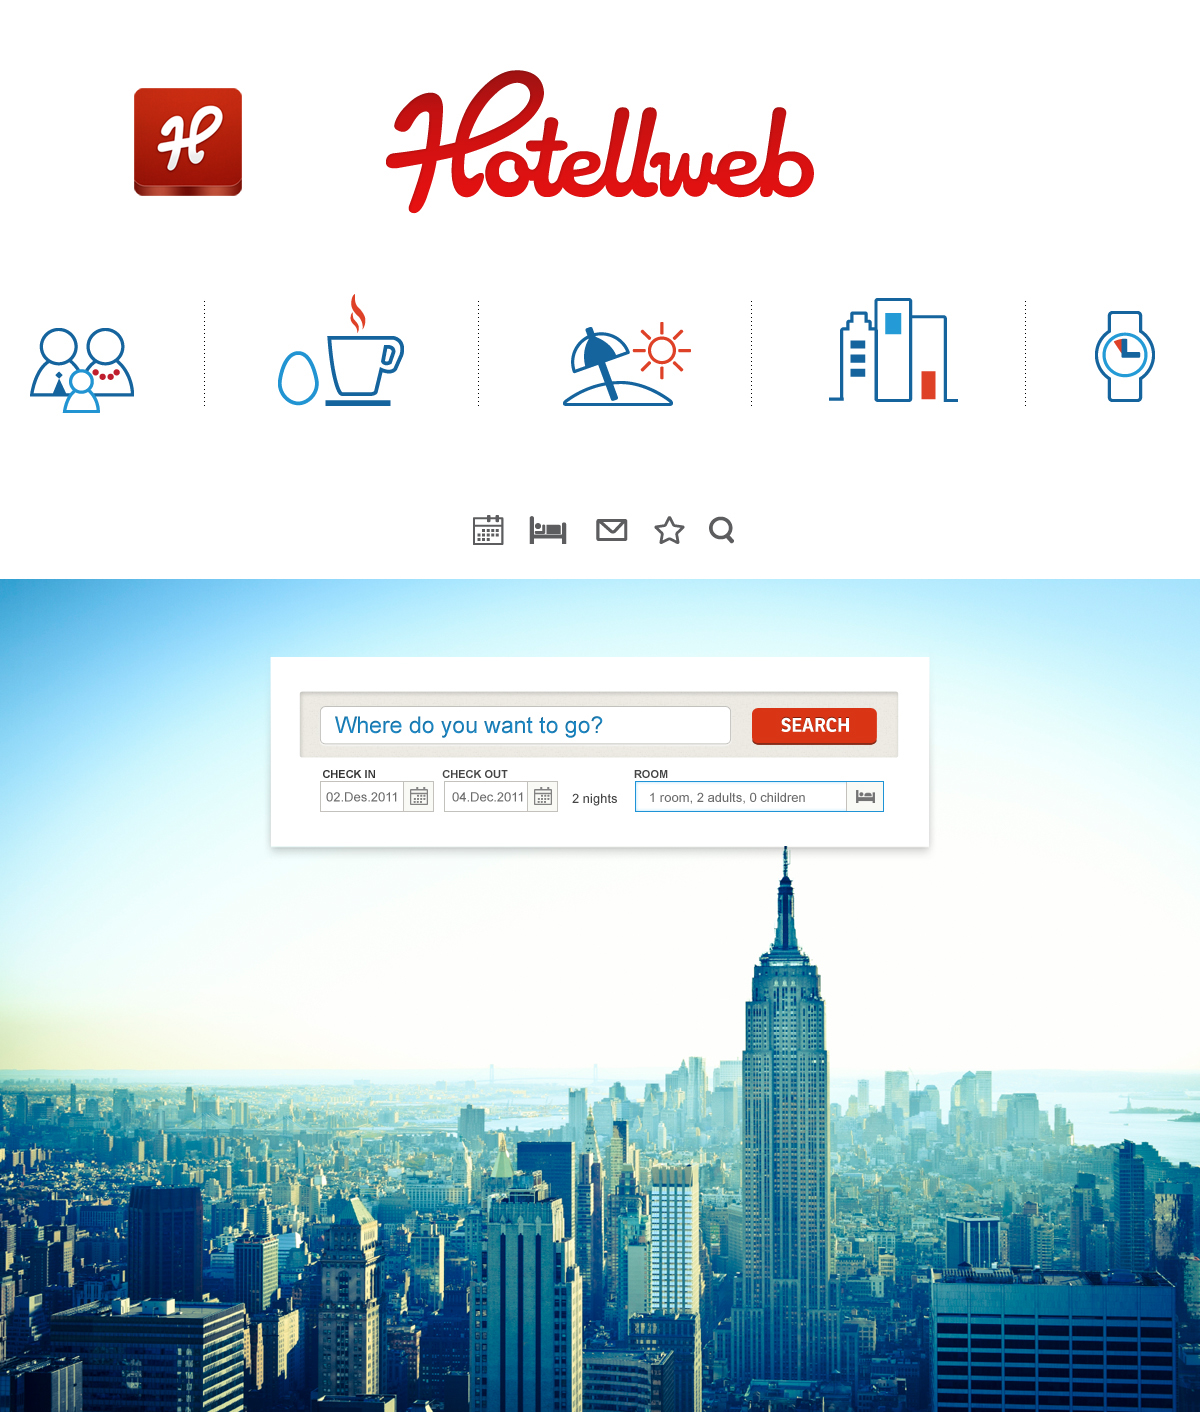 Hotellweb  hotel booking  Travel unfold interaction Responsive  Responsive Design